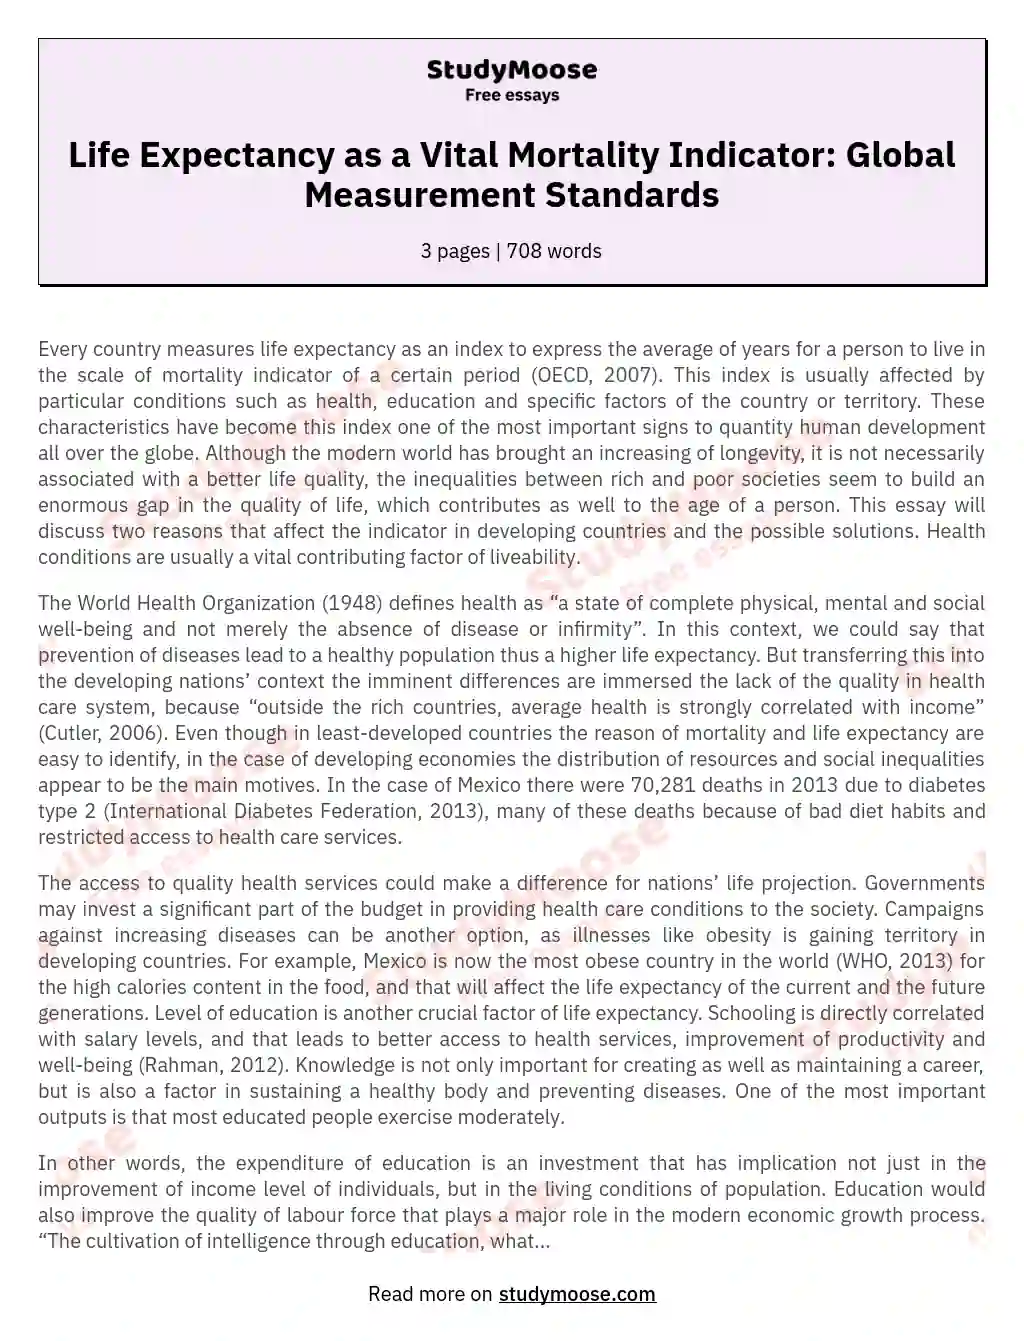 Life Expectancy as a Vital Mortality Indicator: Global Measurement Standards